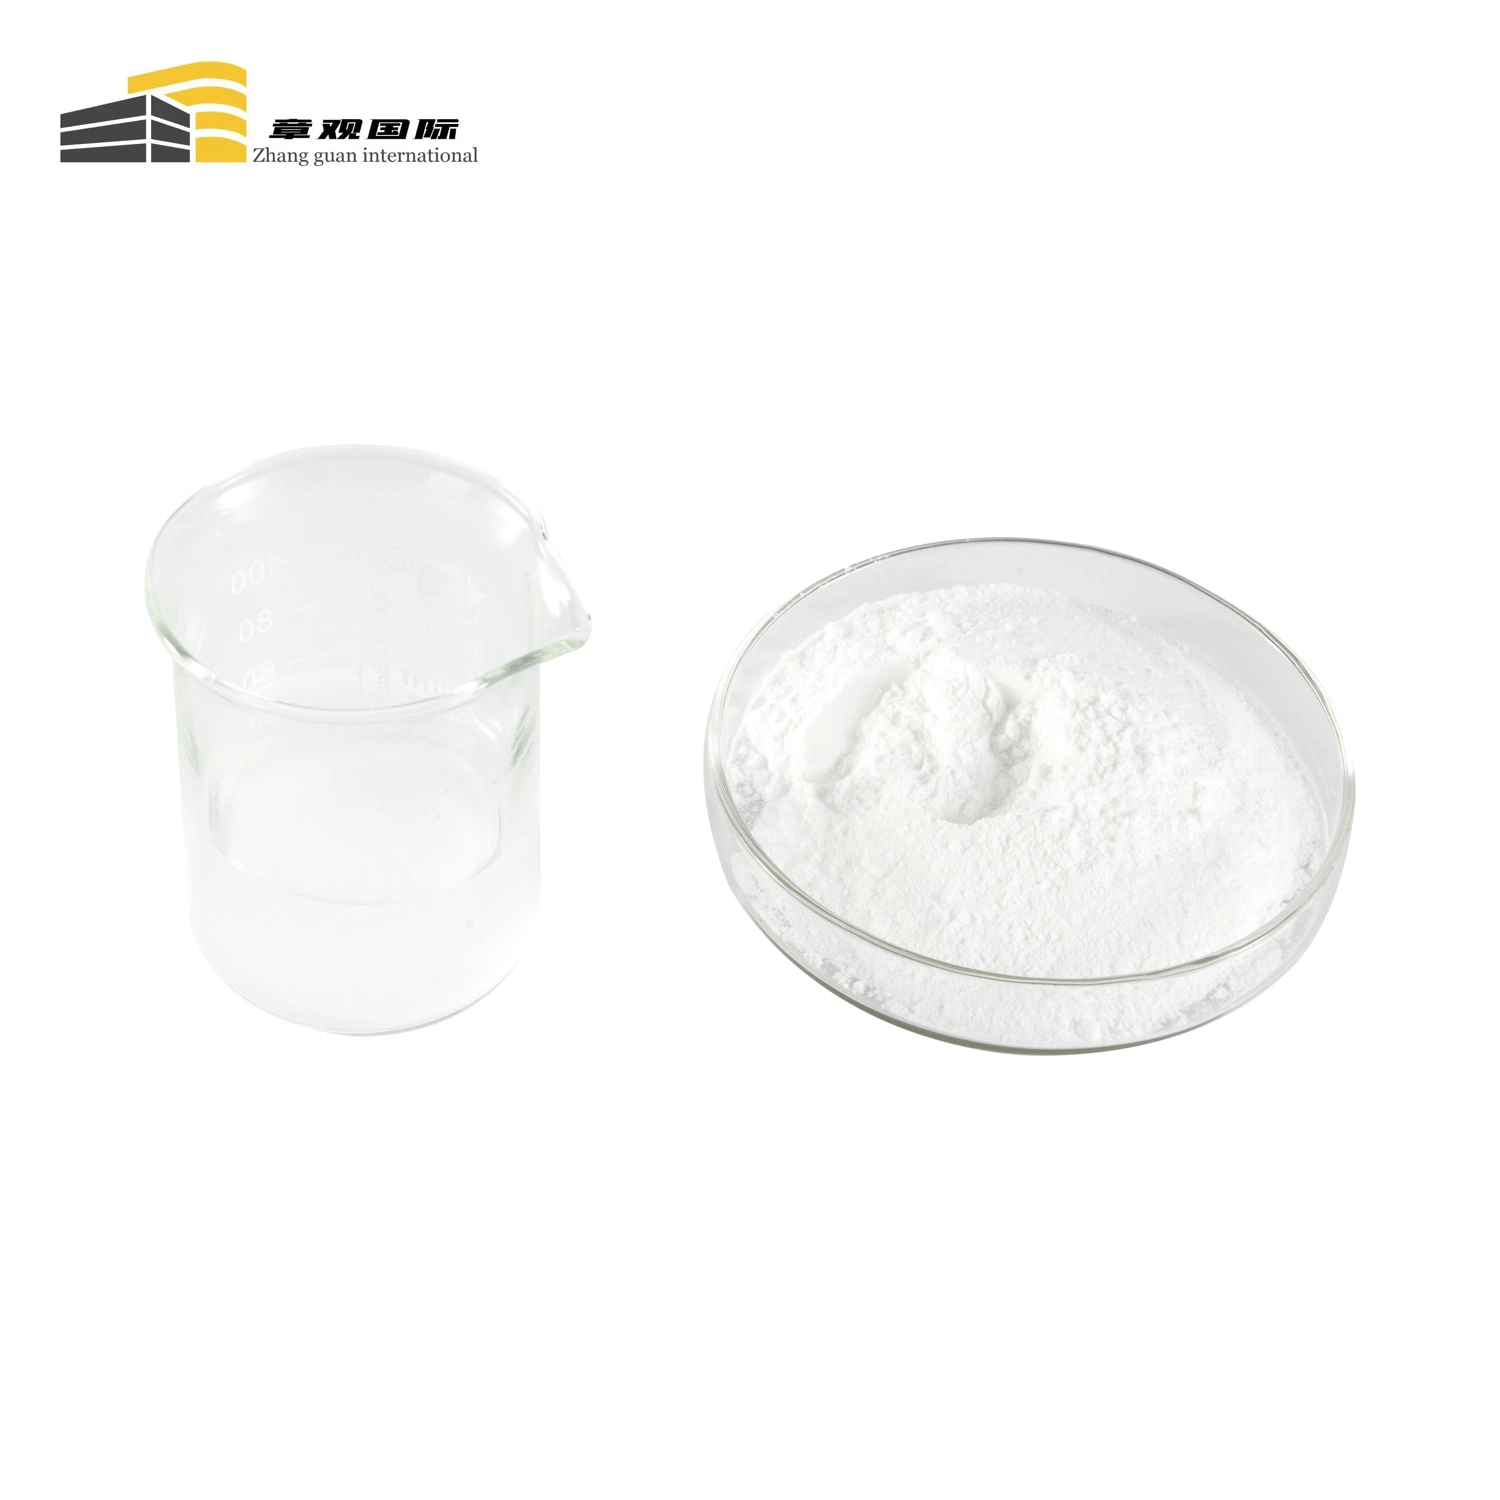 Enhance Fat Metabolism Nutrition and Health Care Product CAS 87-67-2 Raw Material 99% Pure Dl-Choline Hydrogen Tartrate/Choline Tartrate Powder